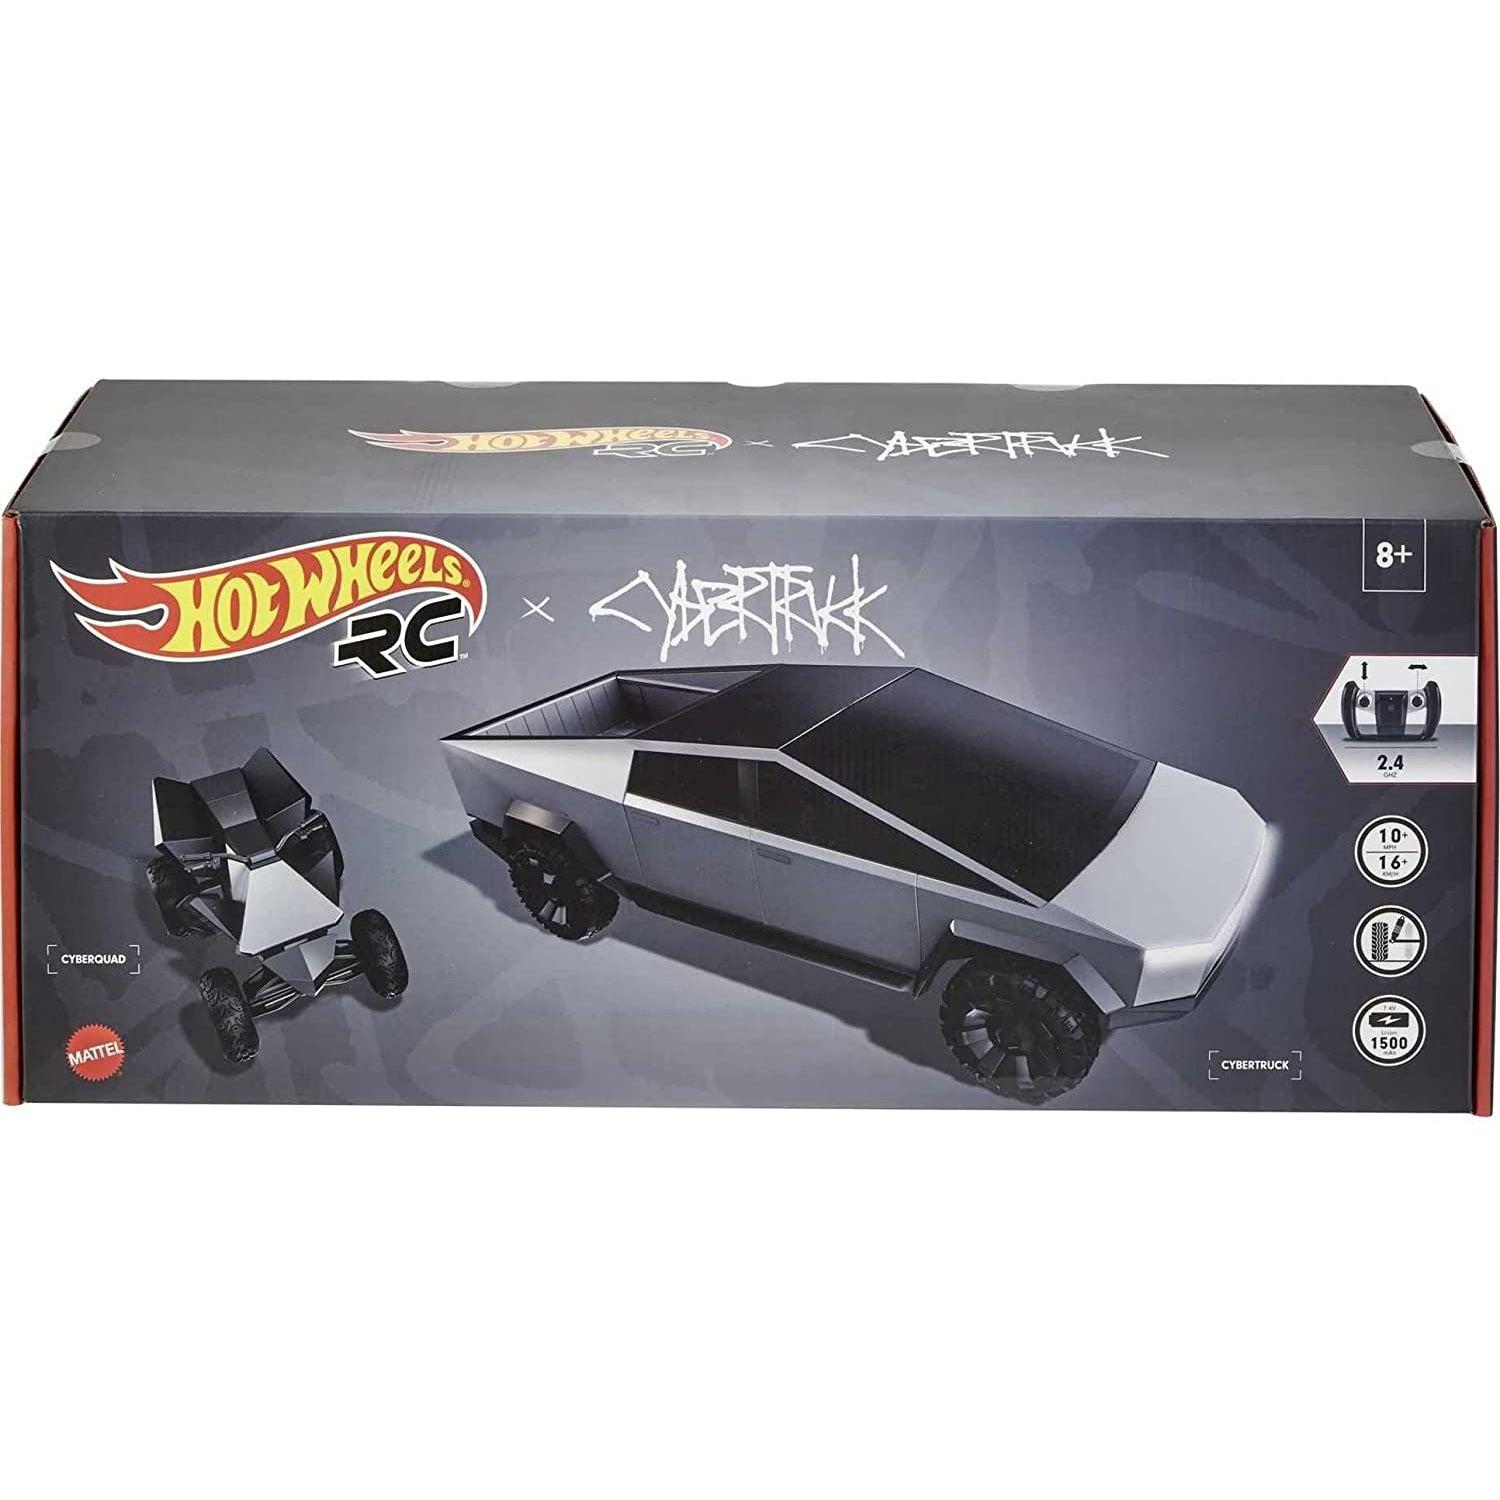 Hot Wheels Rc 1/10 Tesla Cybertruck Radio Controlled Truck: Highly Maneuverable and Fast: The Hot Wheels RC Tesla Cybertruck